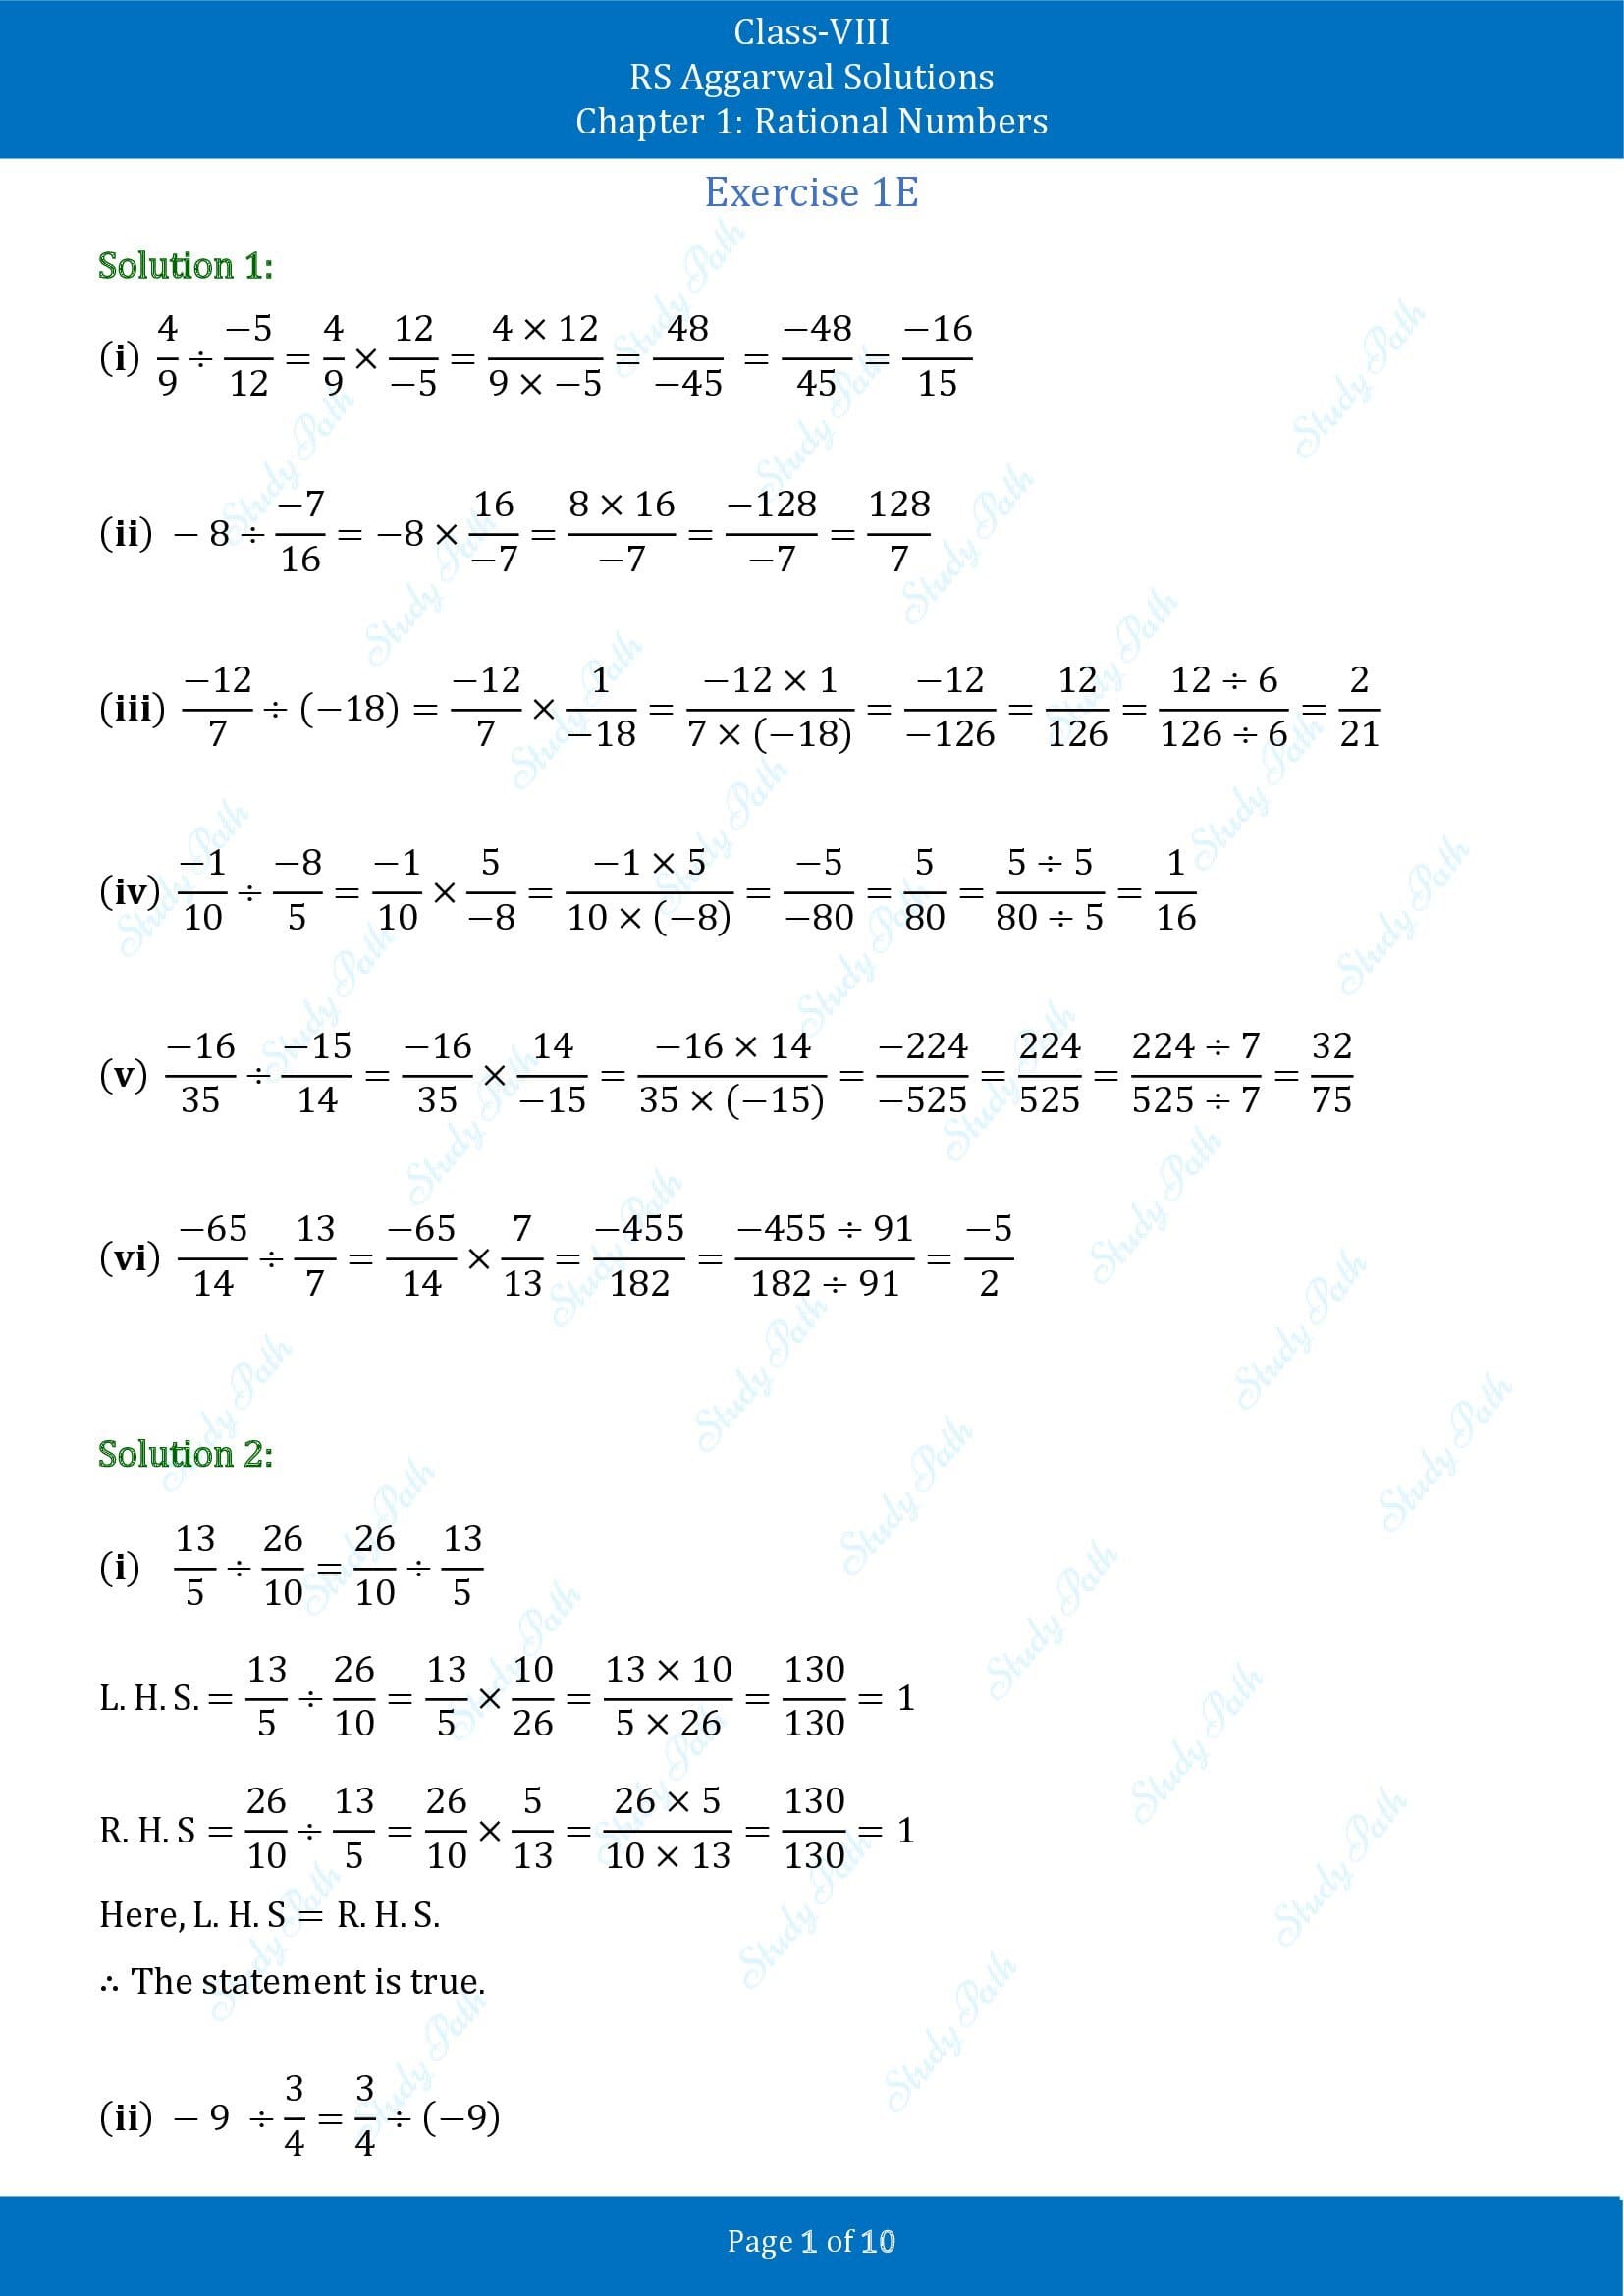 RS Aggarwal Solutions Class 8 Chapter 1 Rational Numbers Exercise 1E 00001